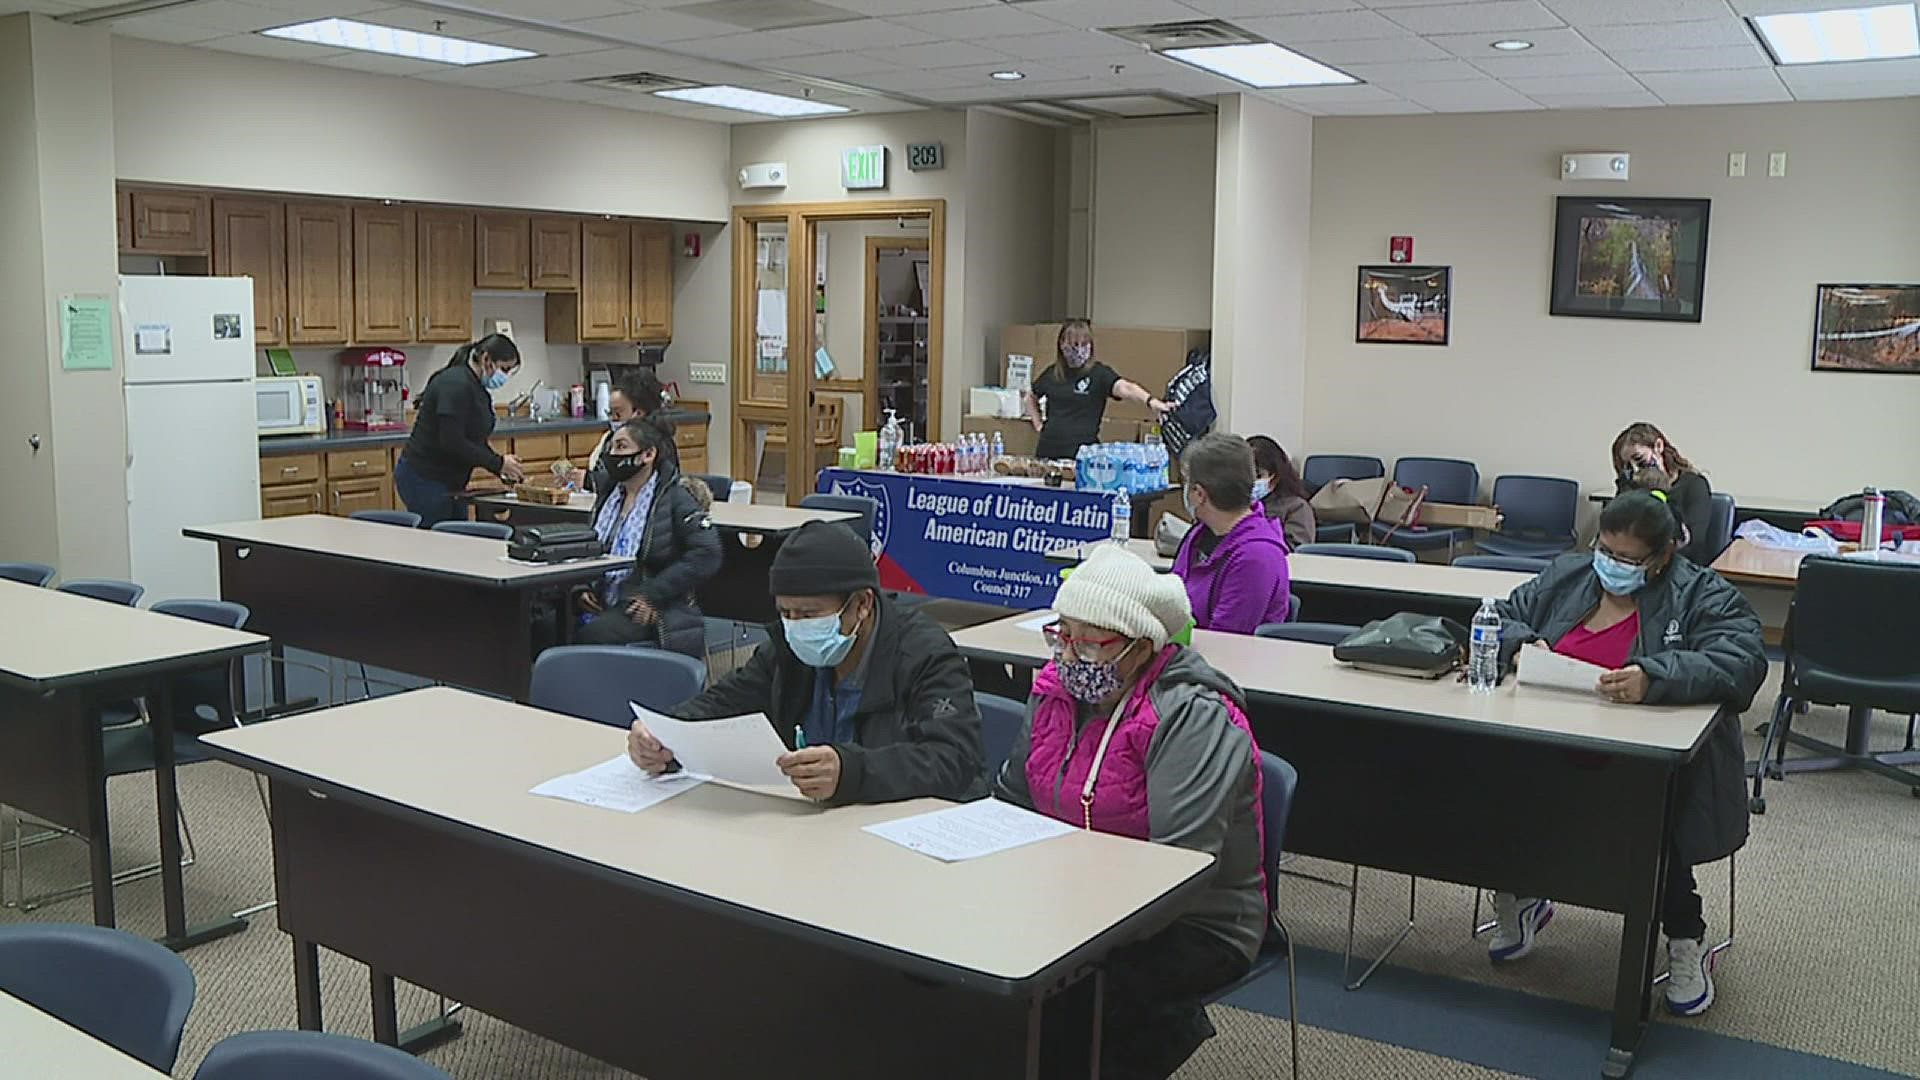 With a week to go before the Feb. 7 Iowa caucus, LULAC Council 317 in Columbus Junction hosted "What is a caucus?" to encourage more Latinos to attend.